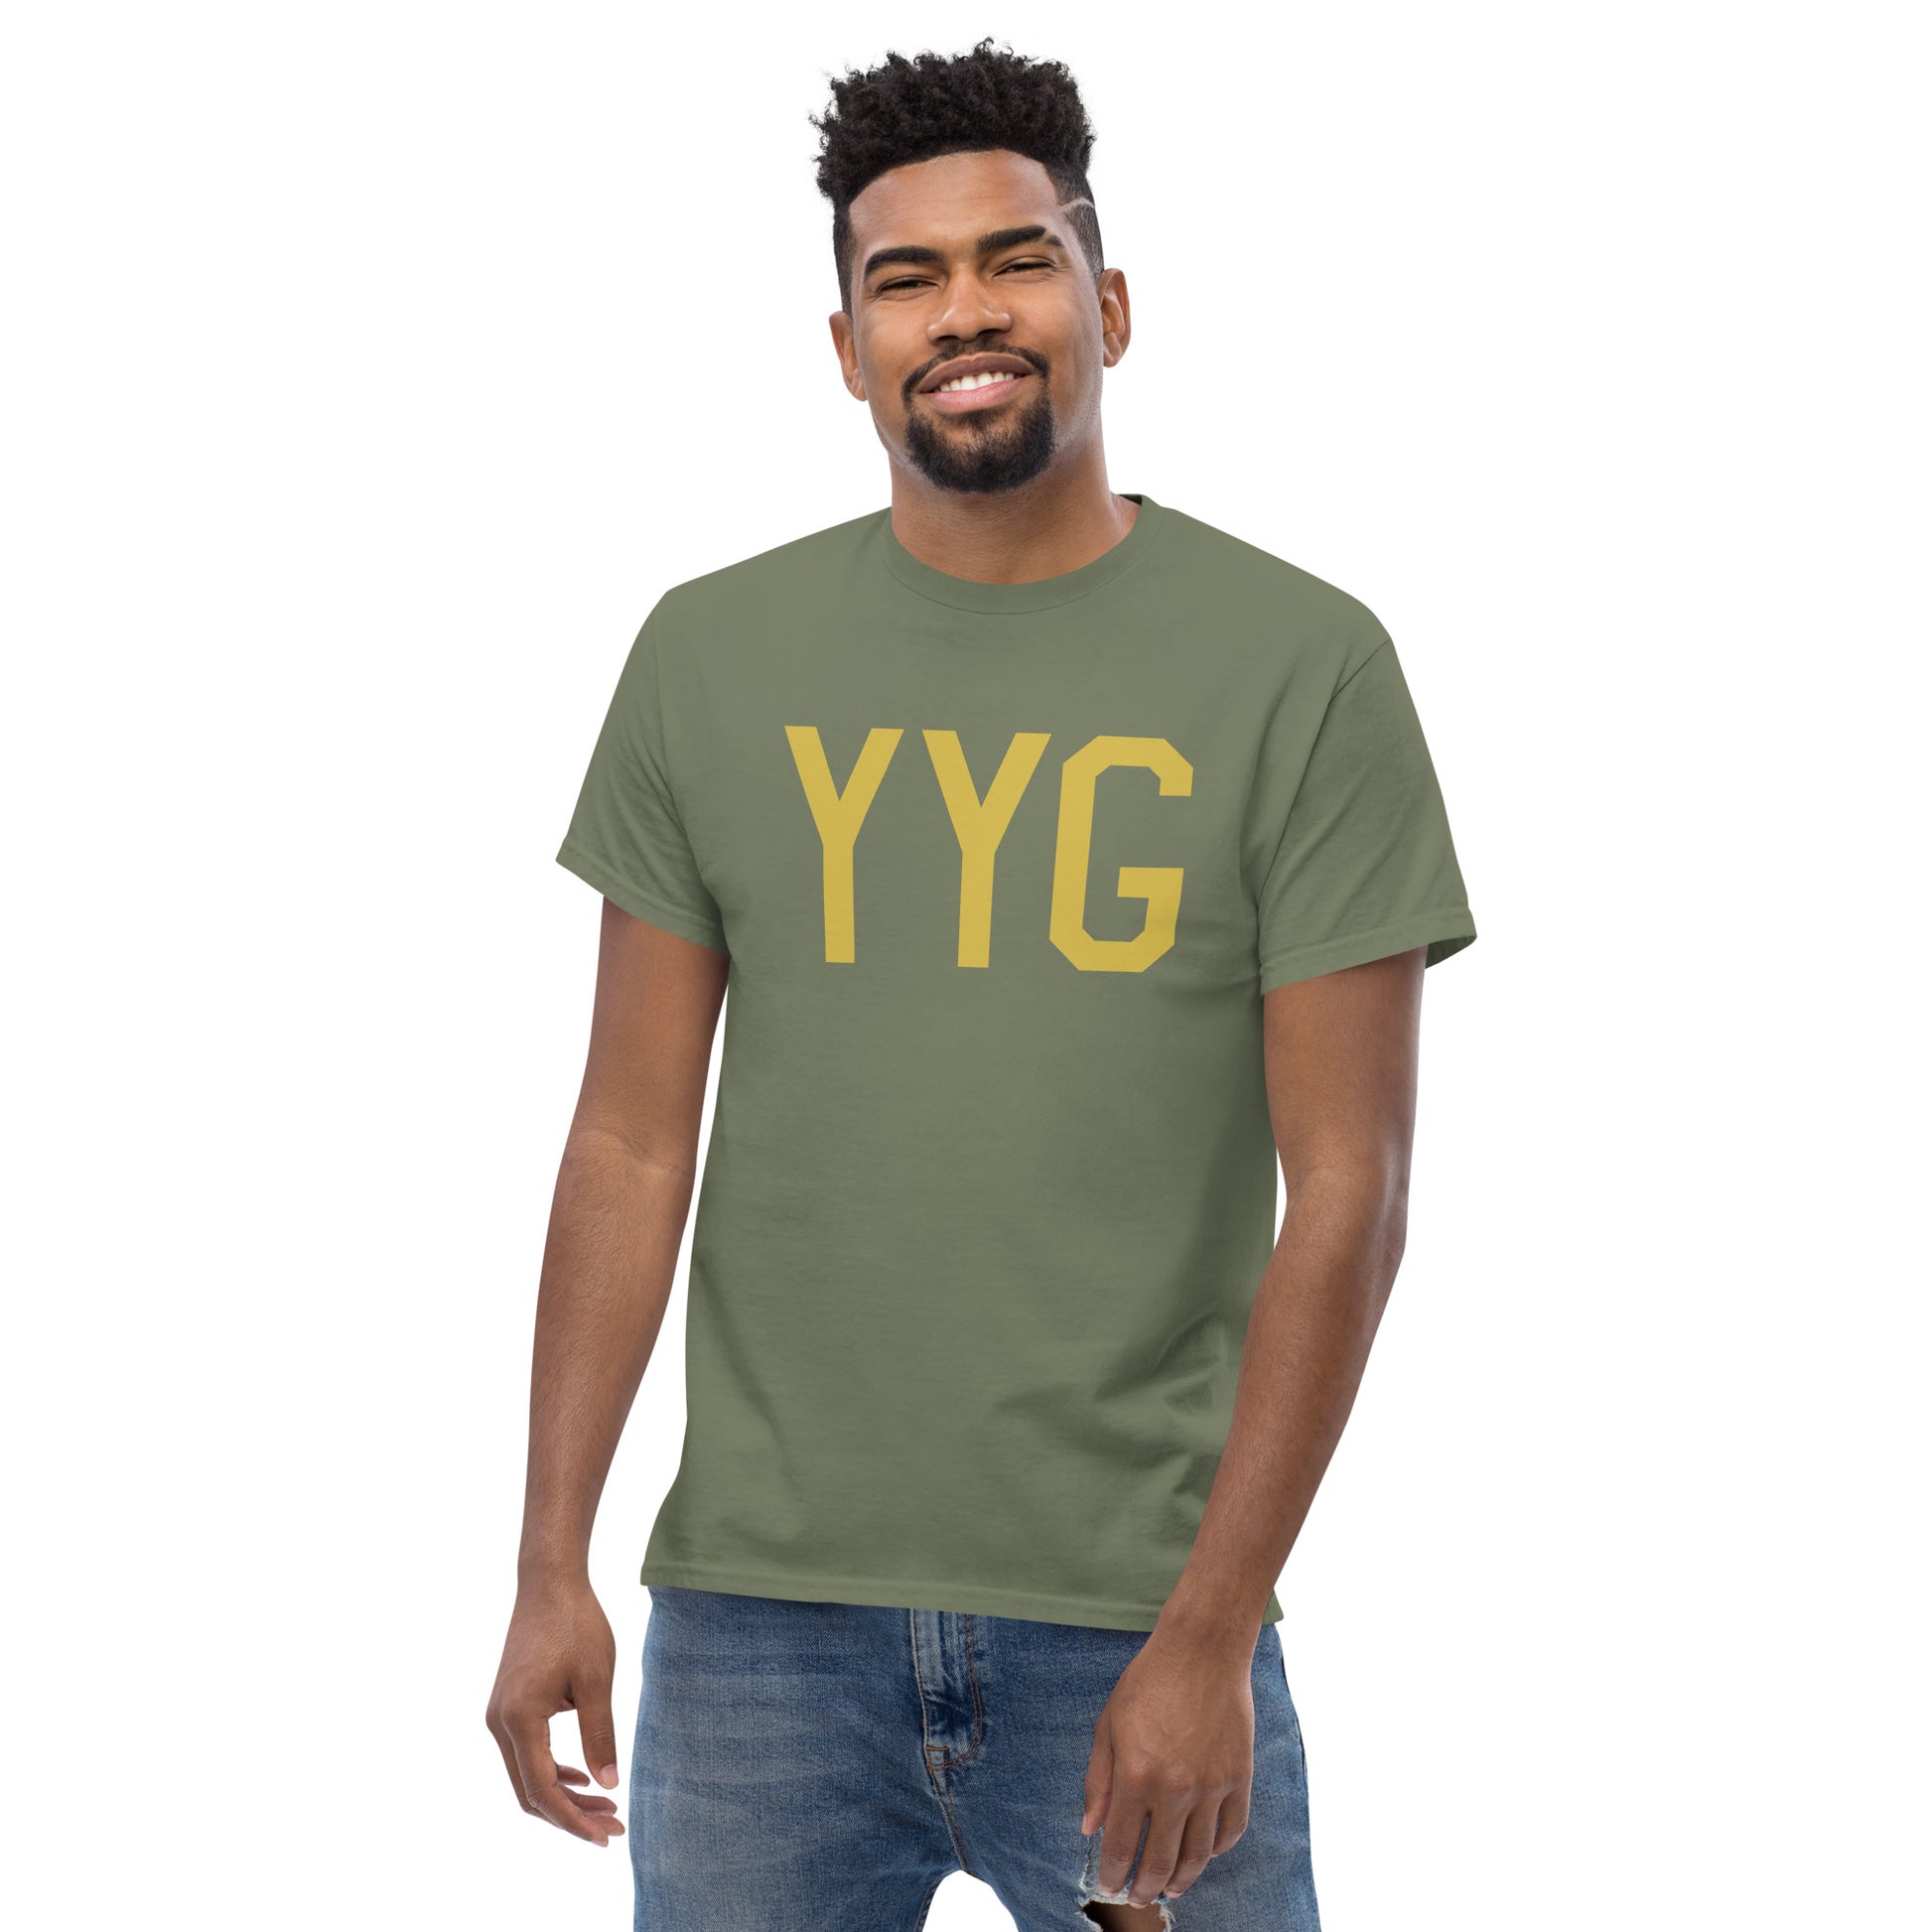 Aviation Enthusiast Men's Tee - Old Gold Graphic • YYG Charlottetown • YHM Designs - Image 06